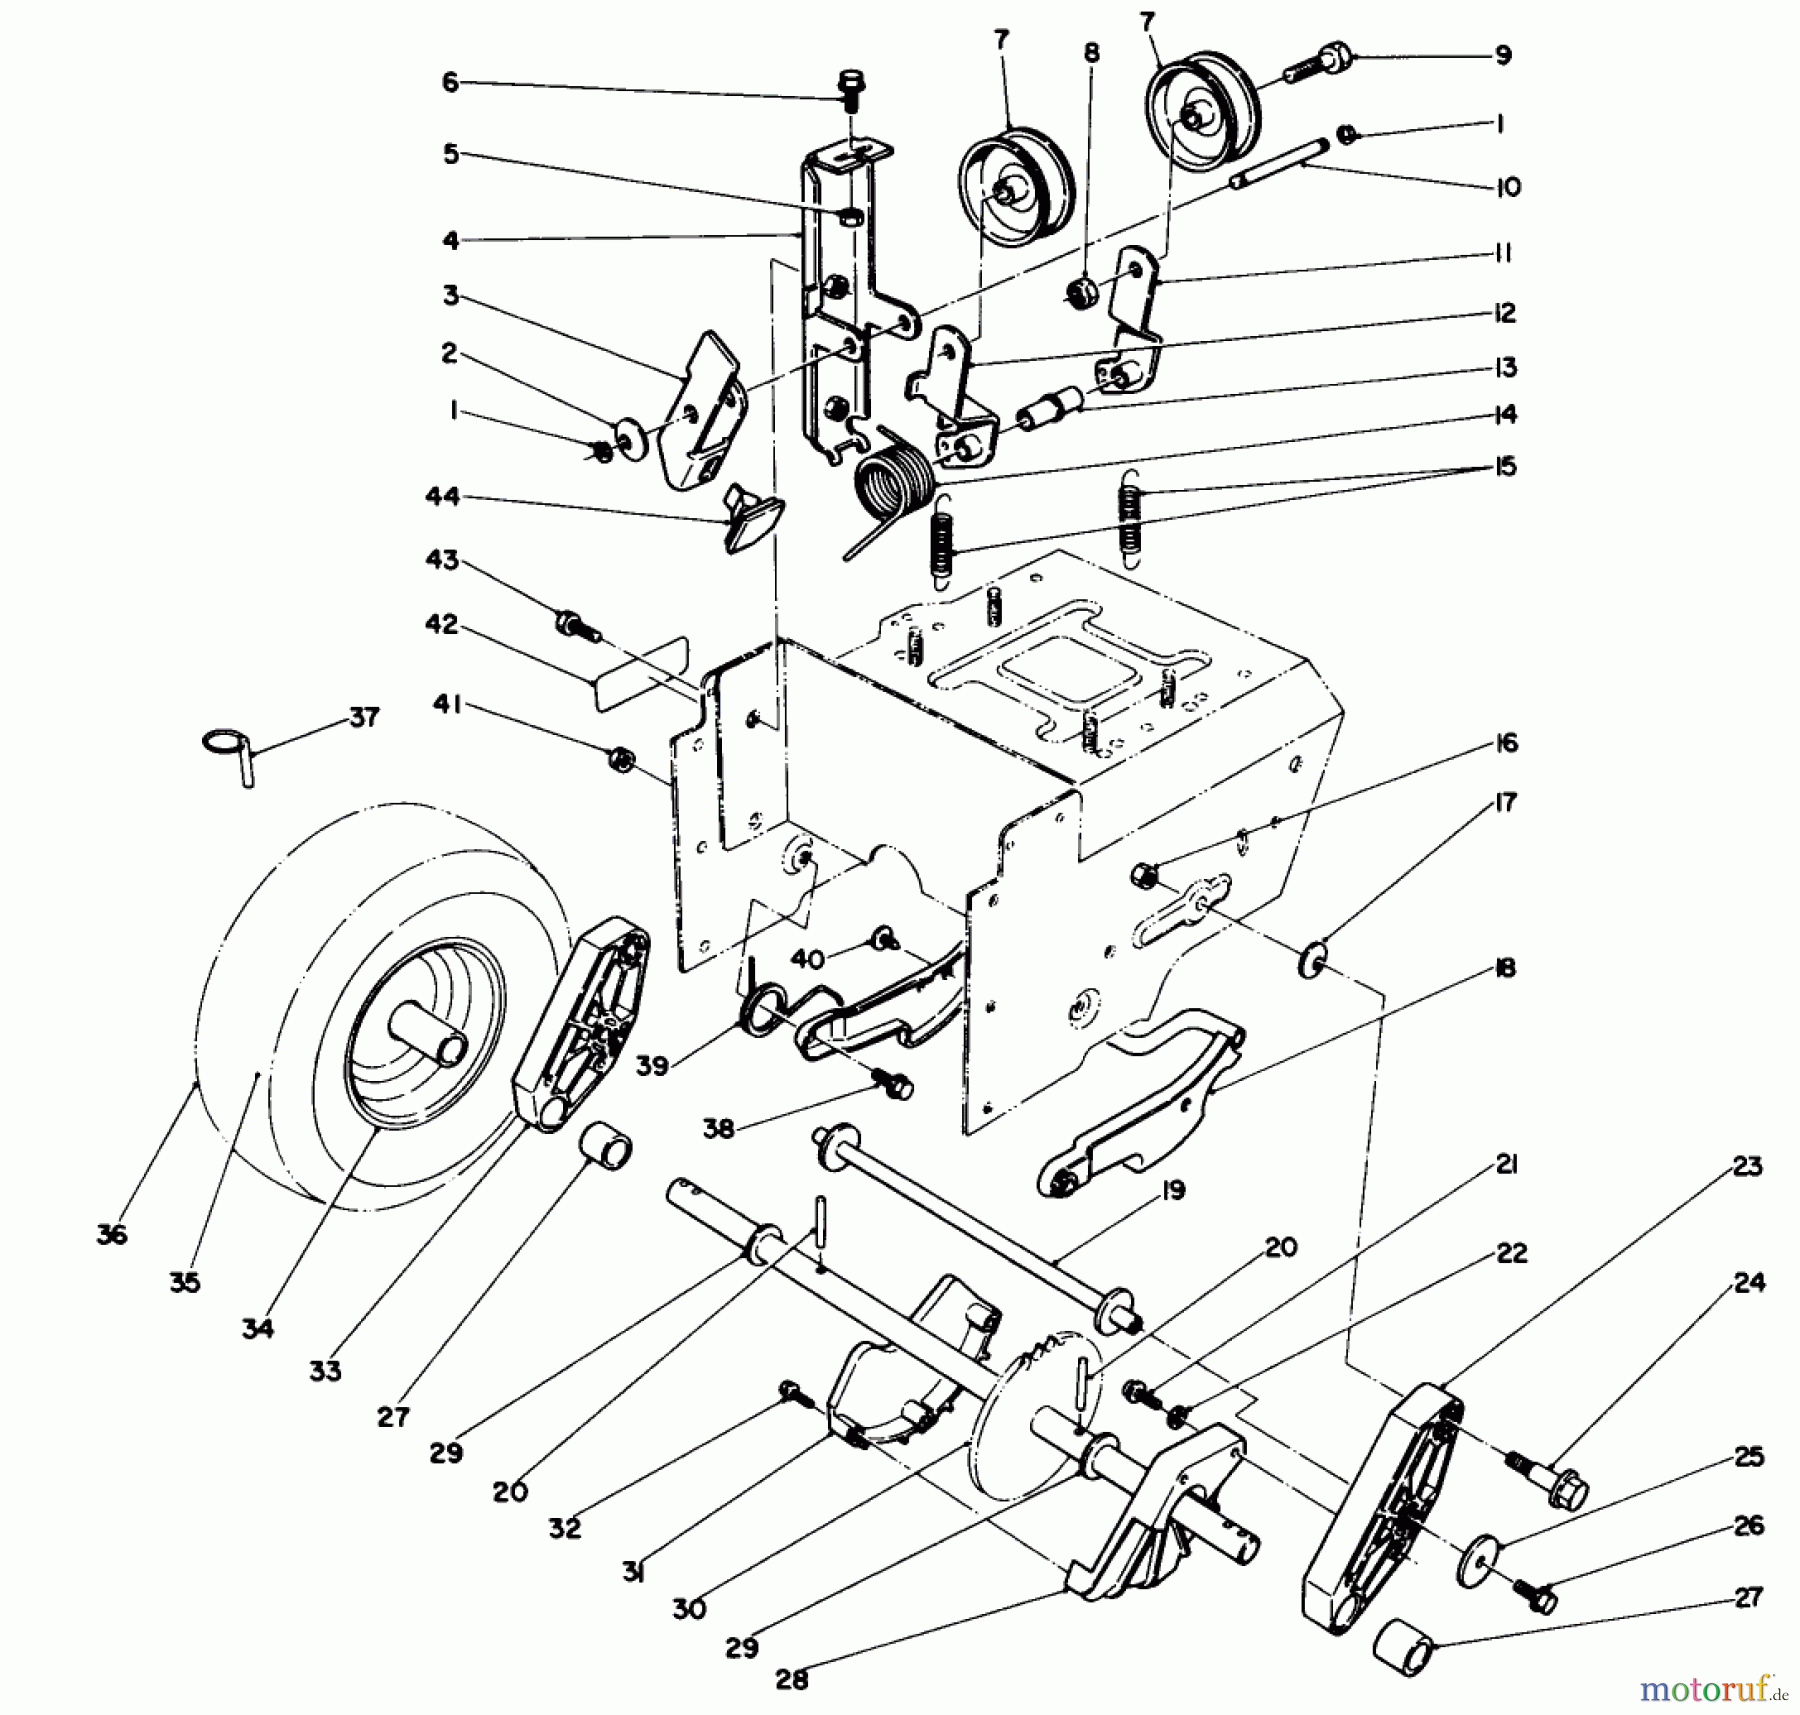  Toro Neu Snow Blowers/Snow Throwers Seite 1 38565 (1132) - Toro 1132 Power Shift Snowthrower, 1988 (8000001-8999999) TRACTION DRIVE ASSEMBLY